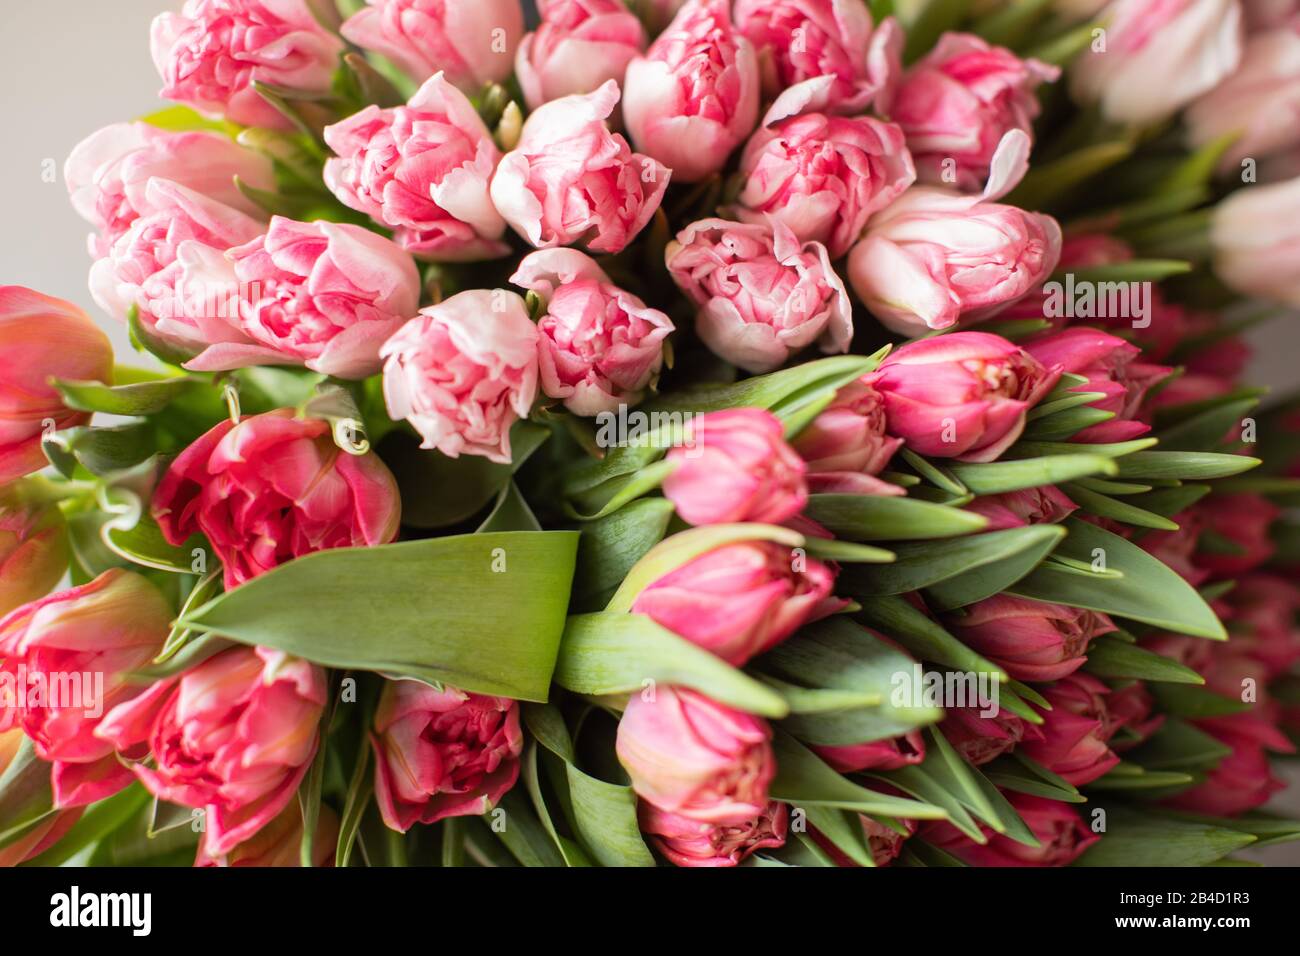 Close Up Large Beautiful Bouquet Of Mixed Tulips Flower Background And Wallpaper Floral Shop Concept Beautiful Fresh Cut Bouquet Flowers Delivery Stock Photo Alamy